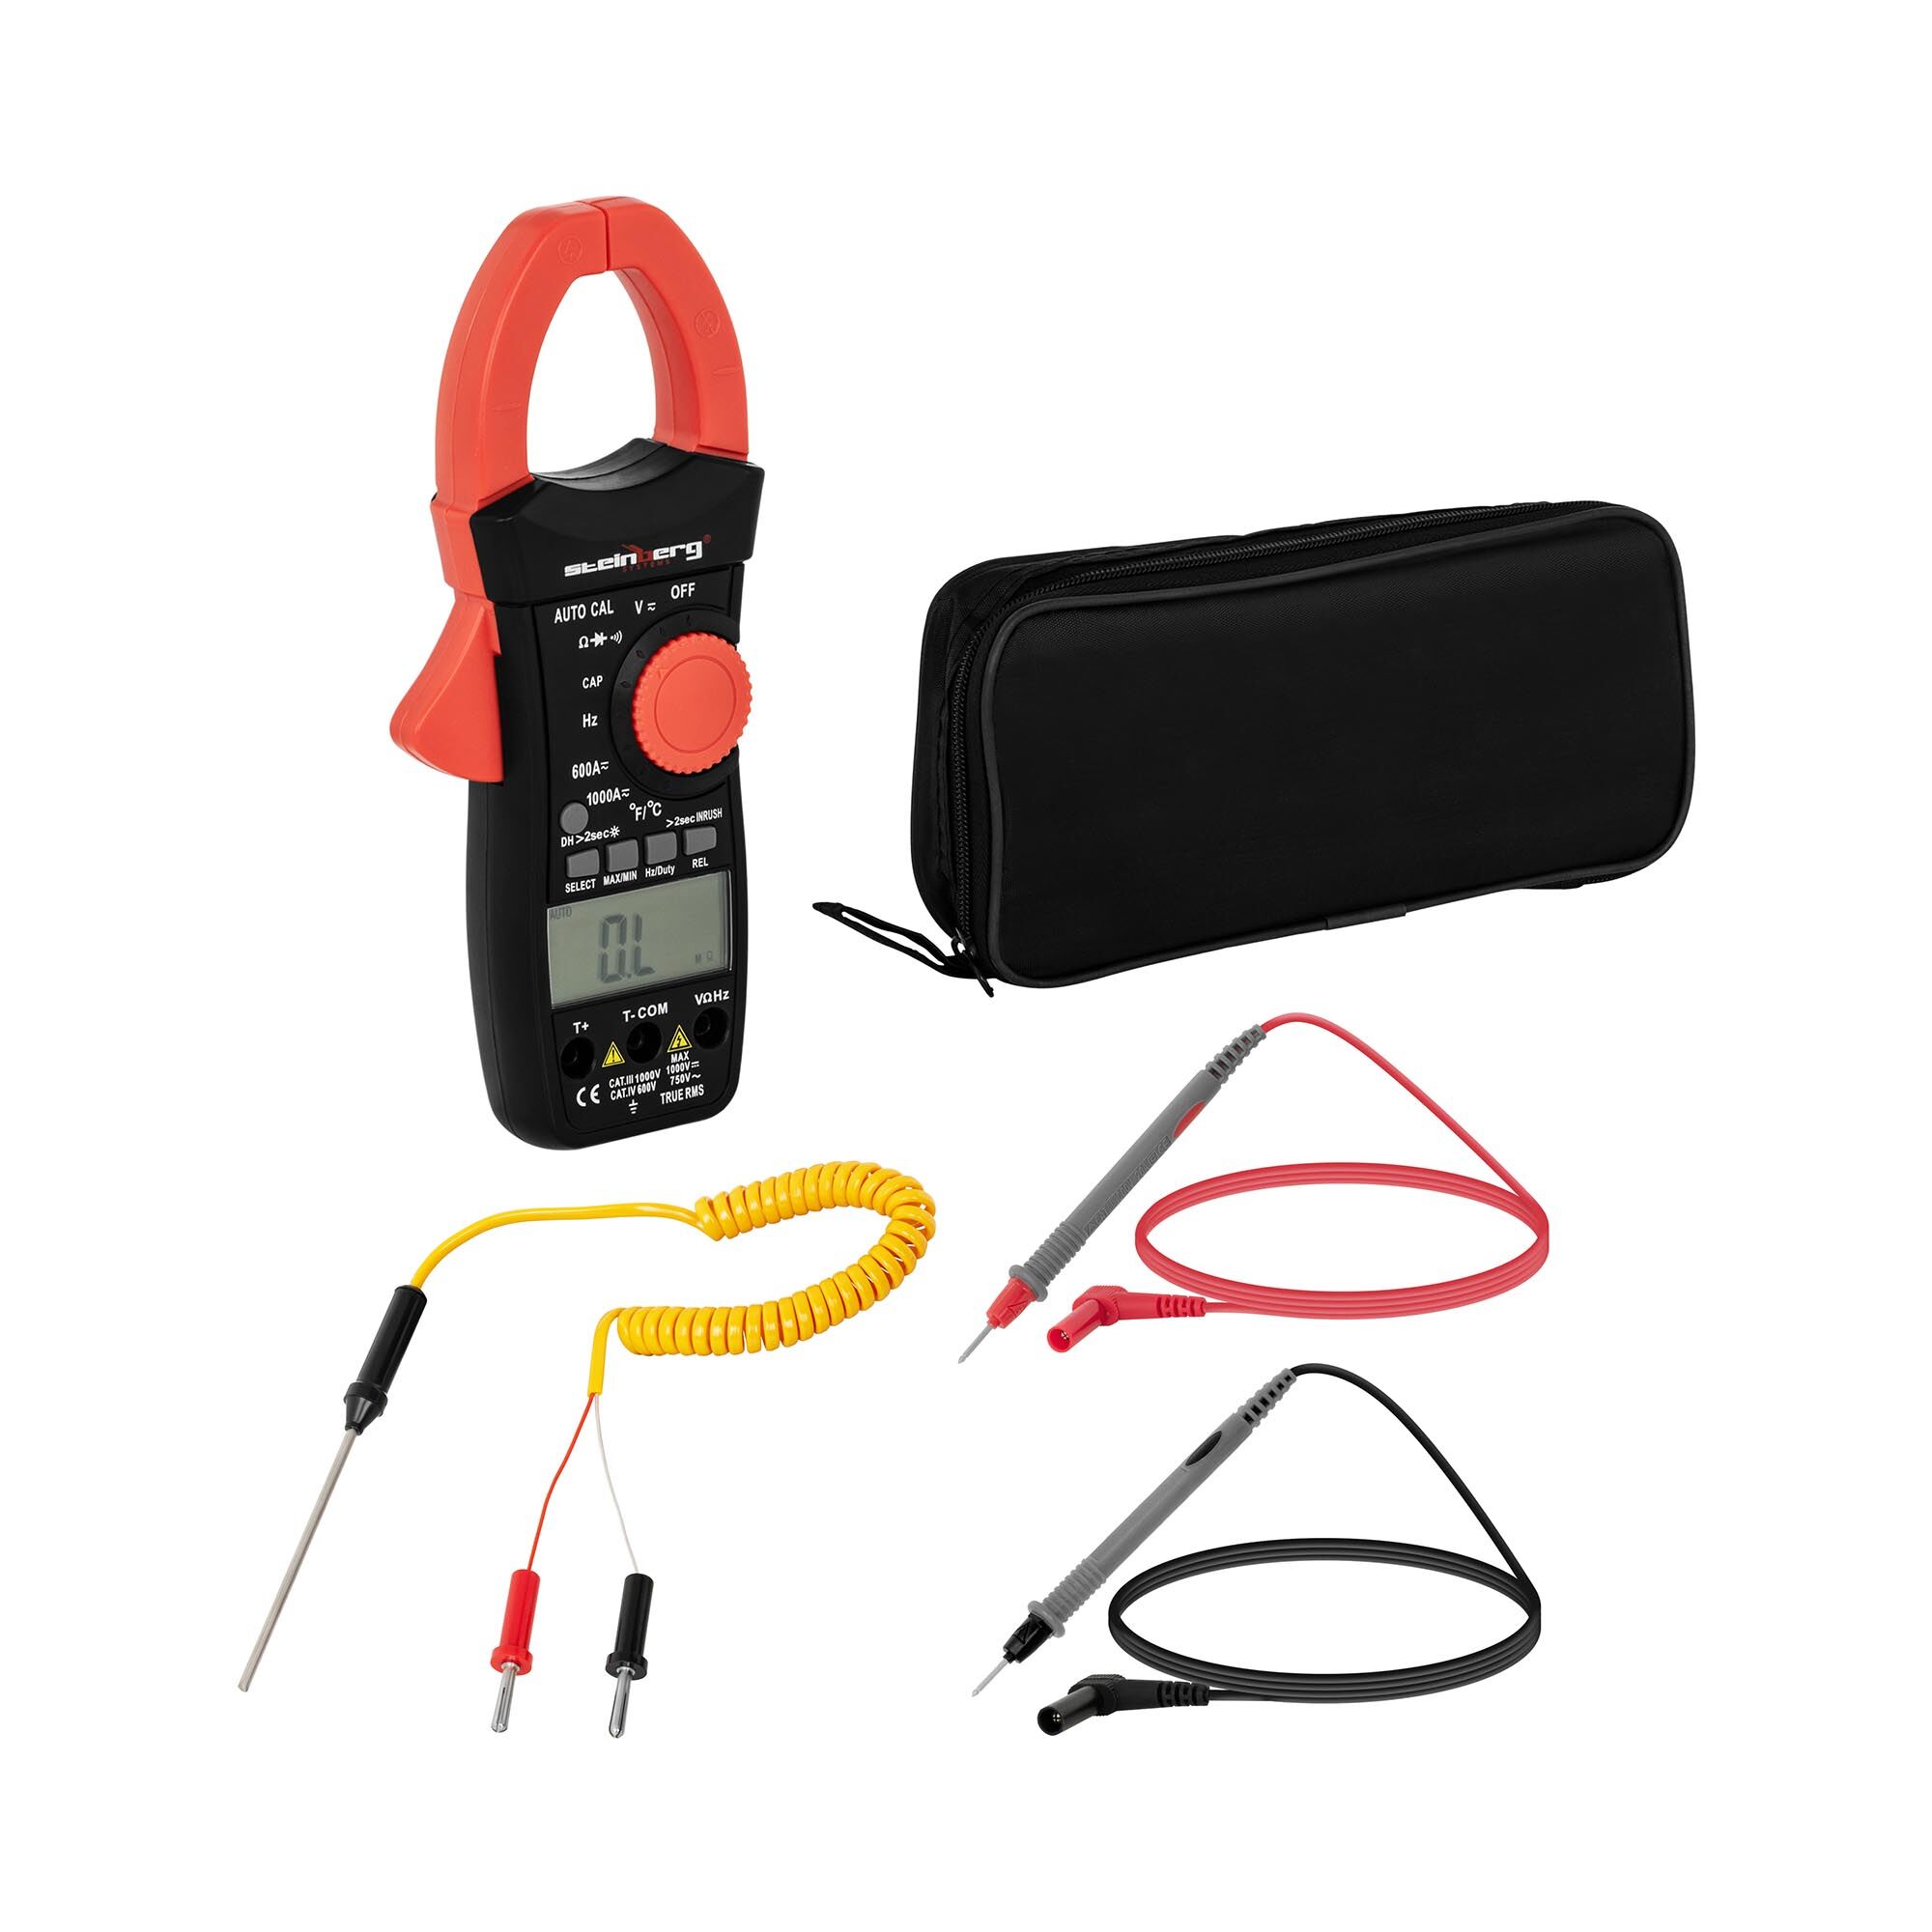 Steinberg Systems Clamp Meter - LCD - CAT III - TRMS - inrush current measurement SBS-CM-1000